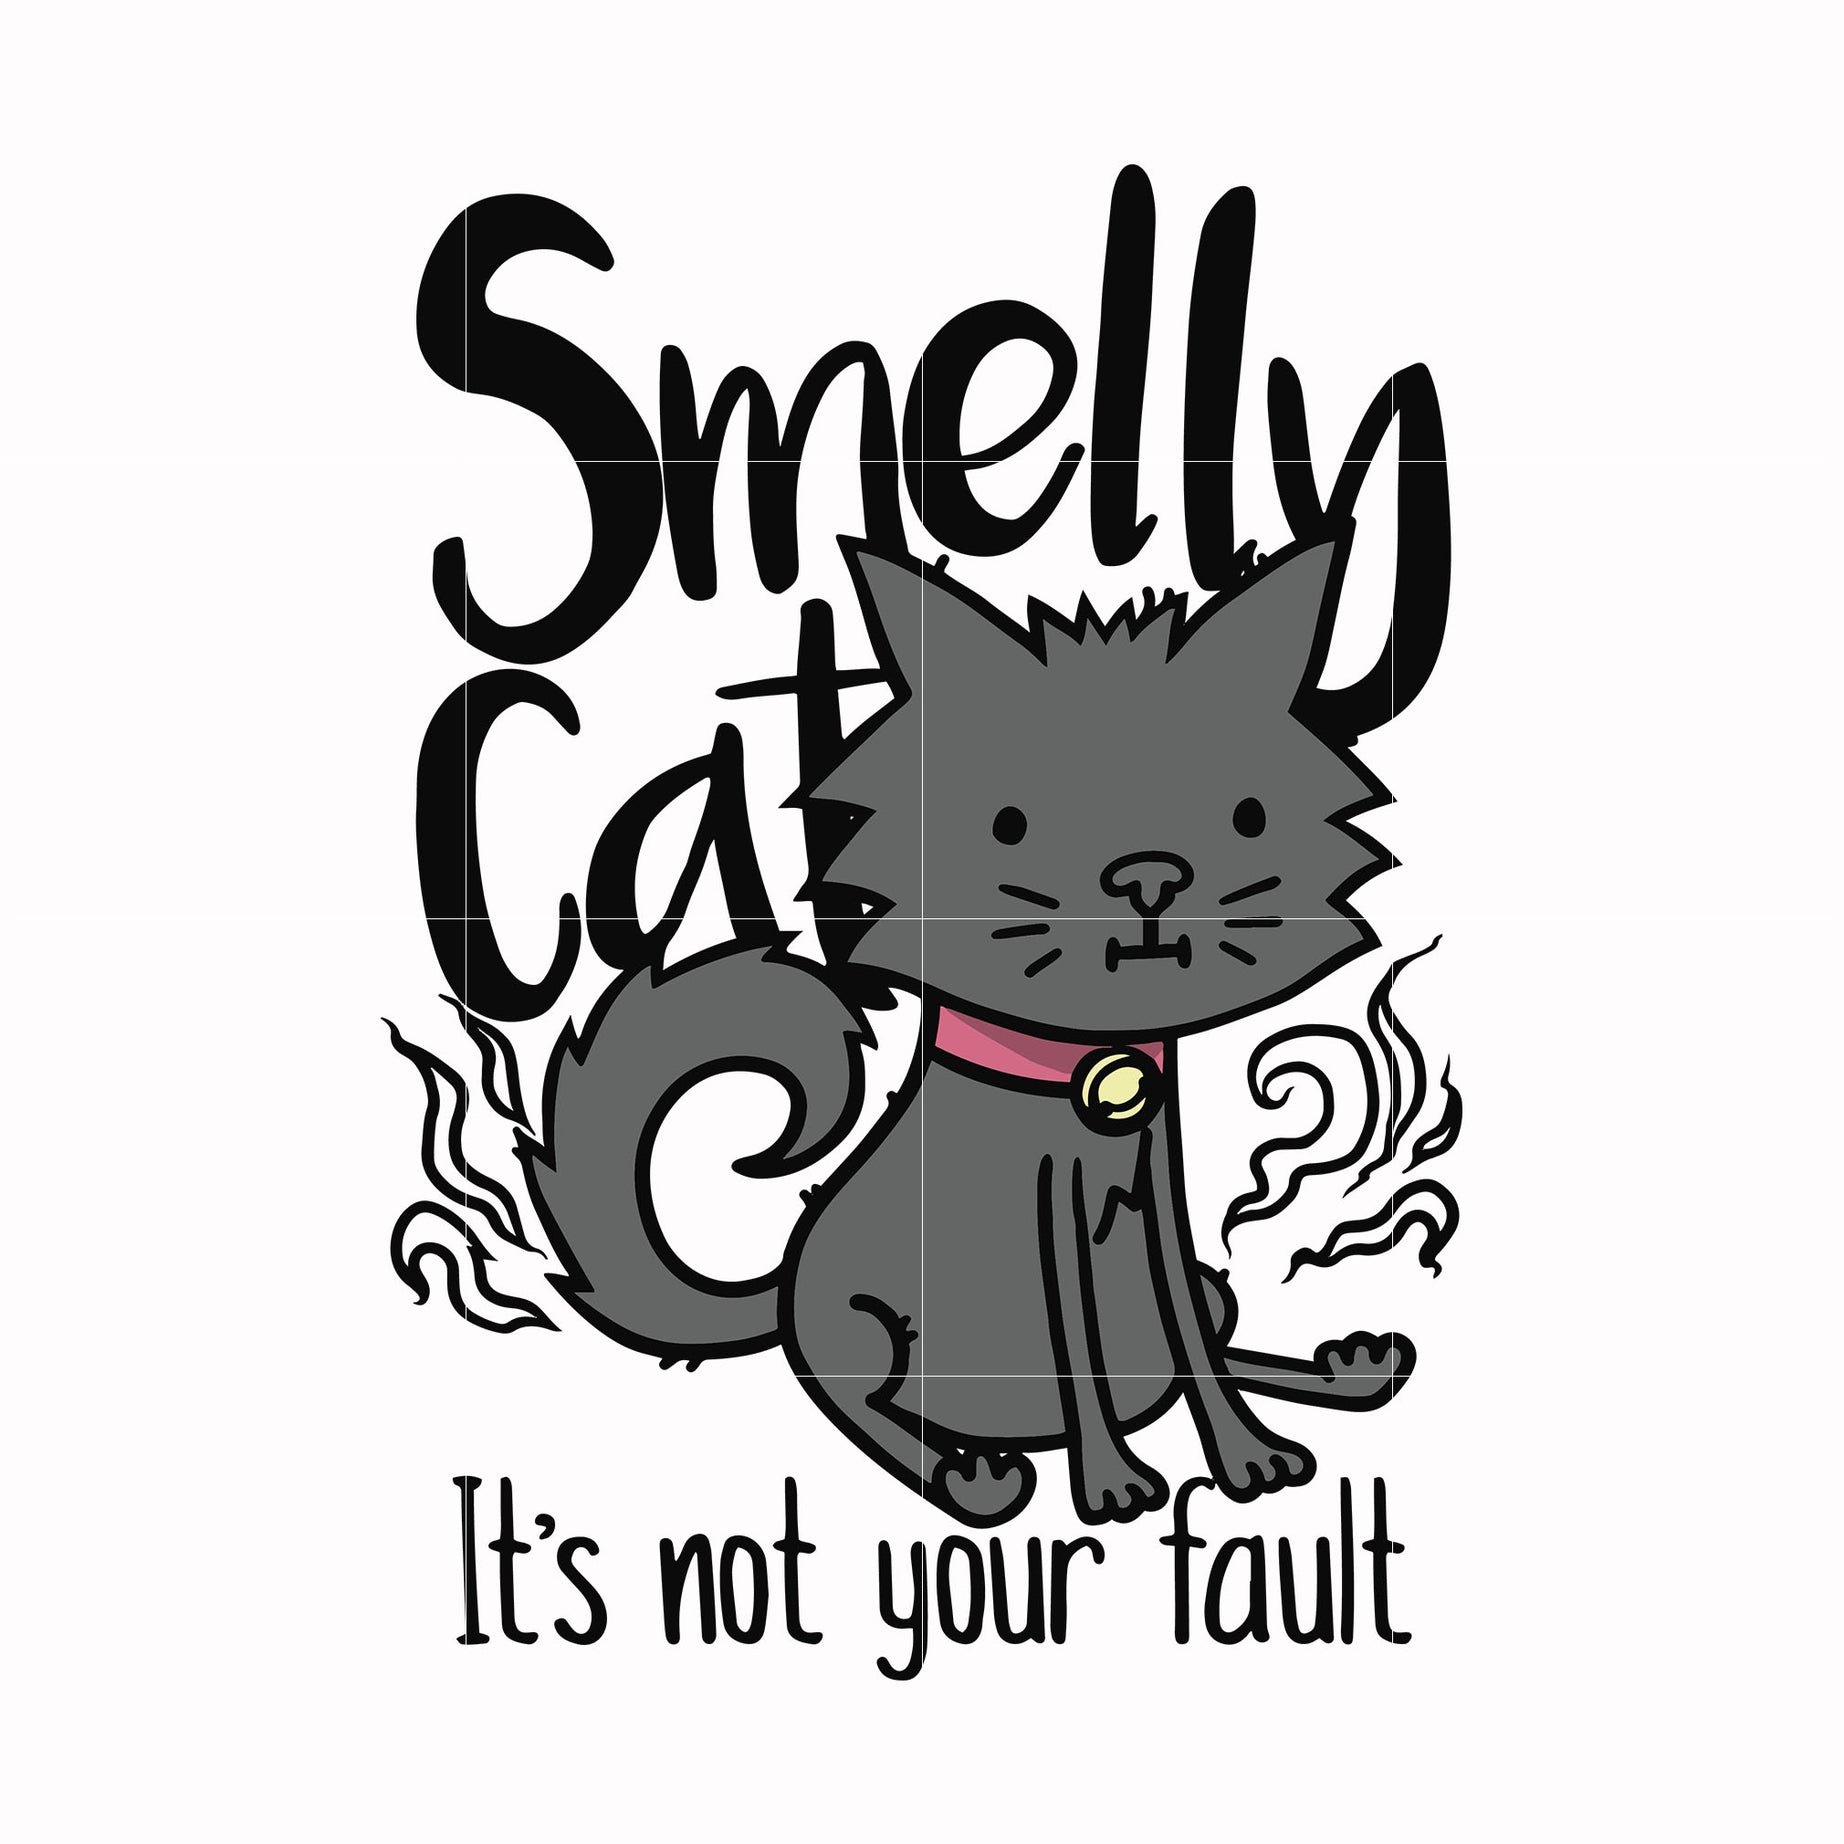 Smelly cat it's not your fault svg, png, dxf, eps file FN0001003